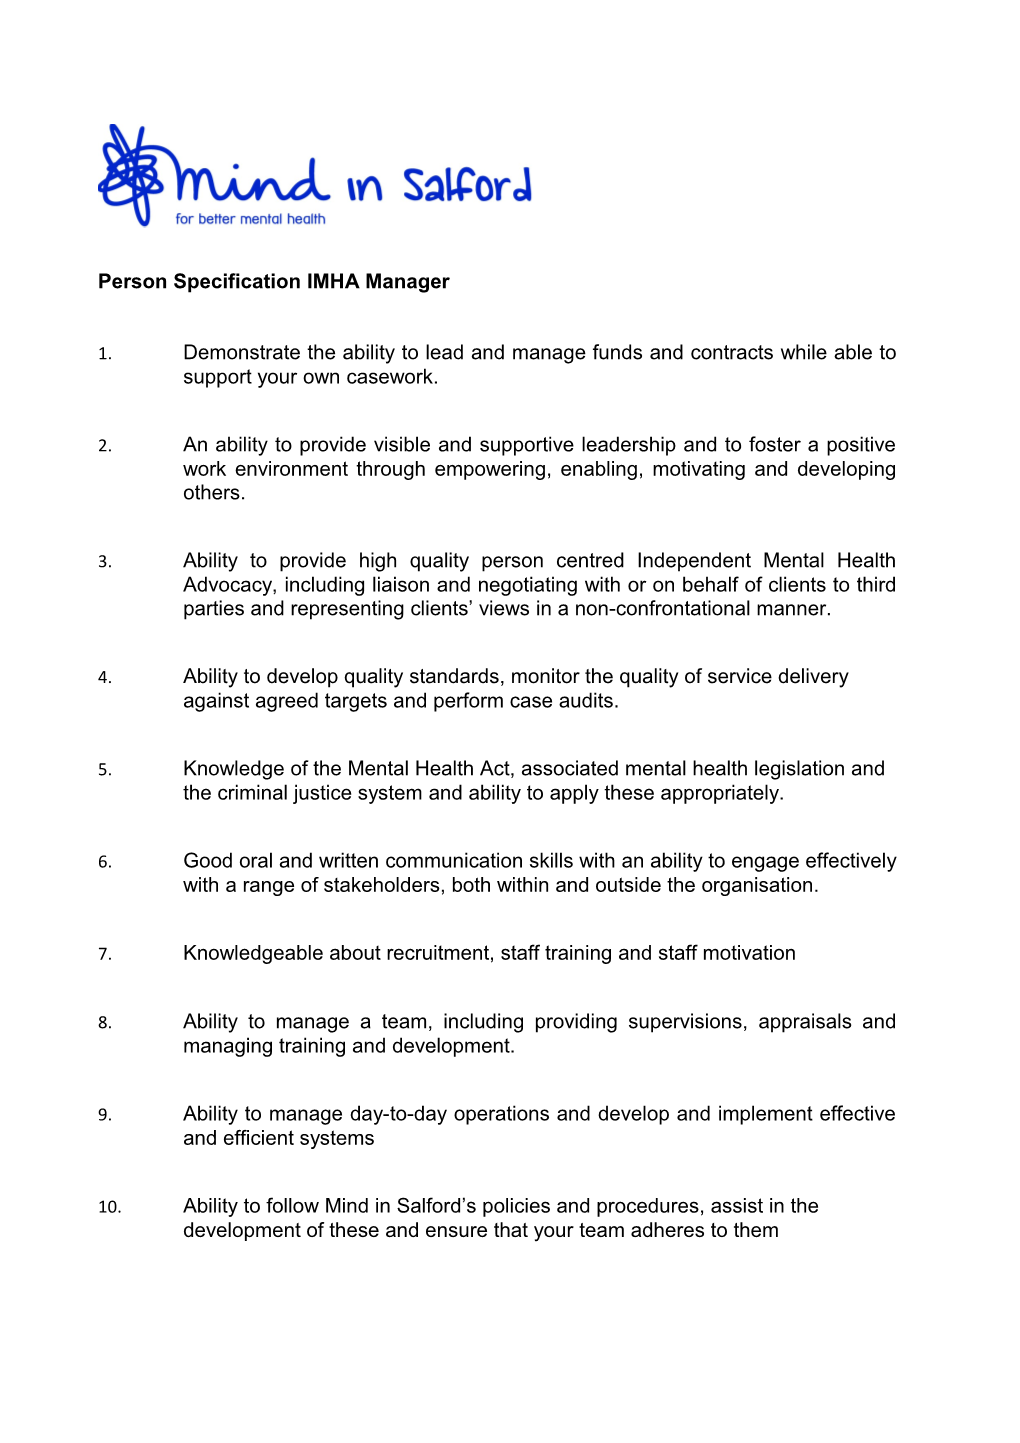 Person Specification IMHA Manager